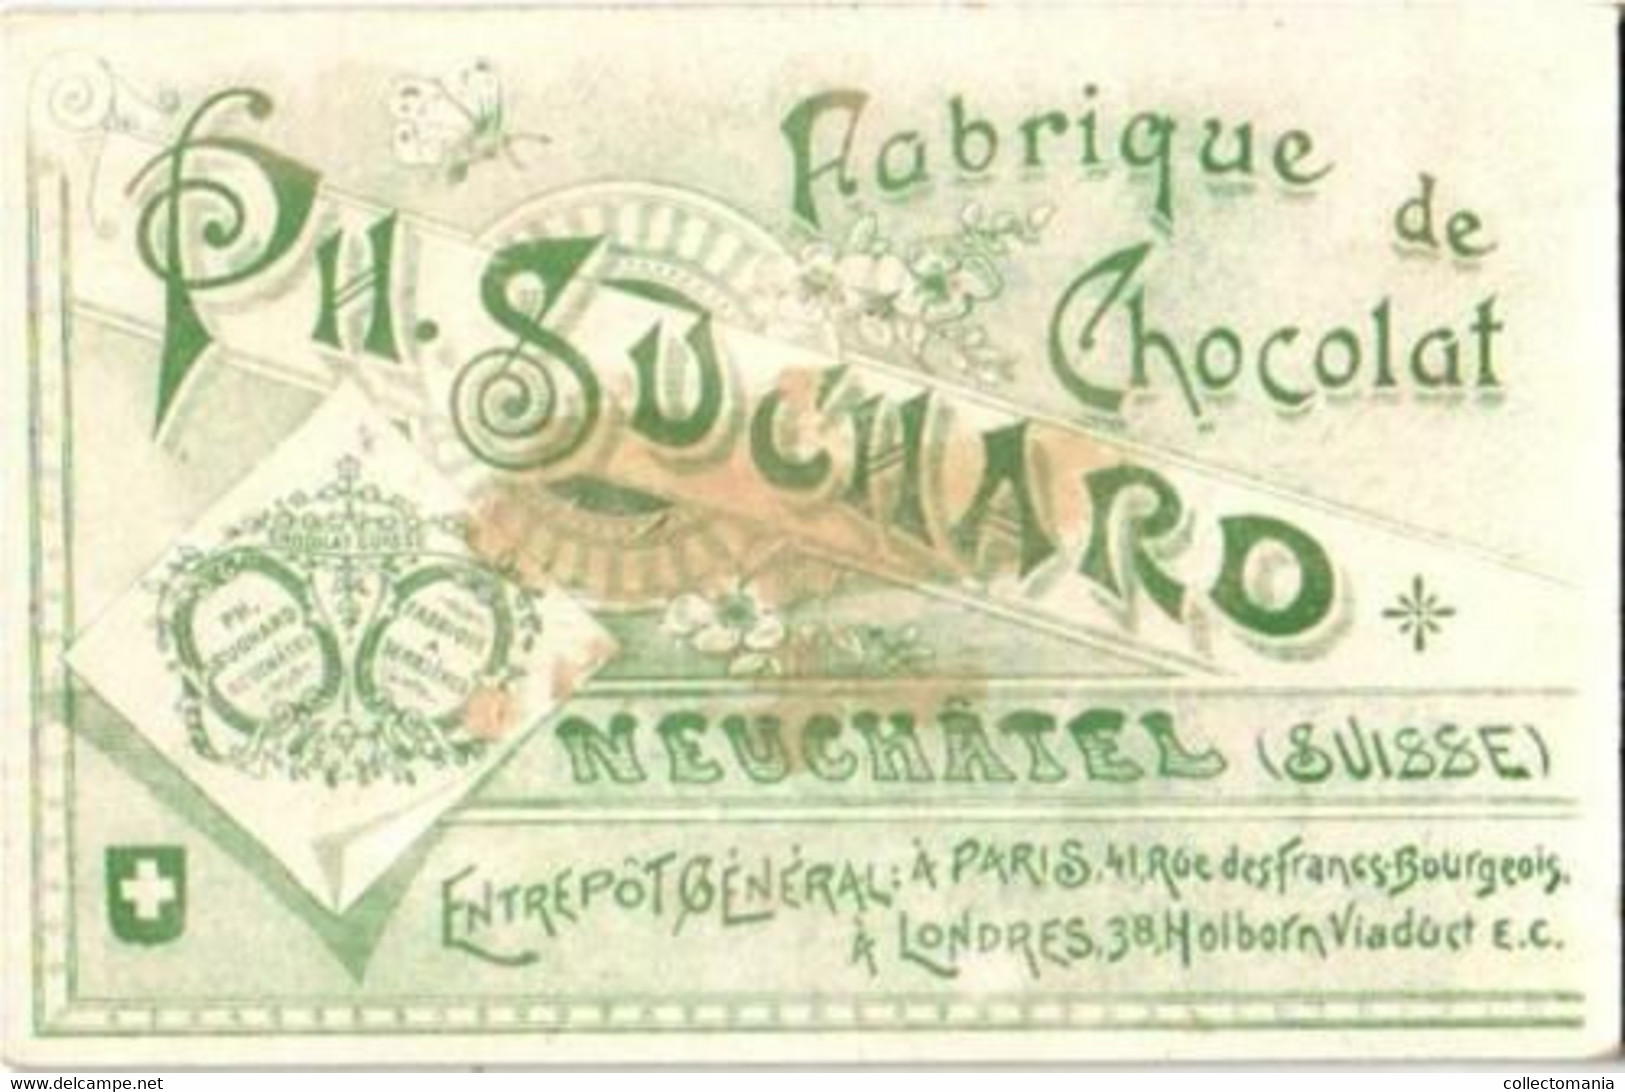 6 chromo lithography cards travel with chocolate SUCHARD, set 31B, anno 1892 VG suisse chocolade